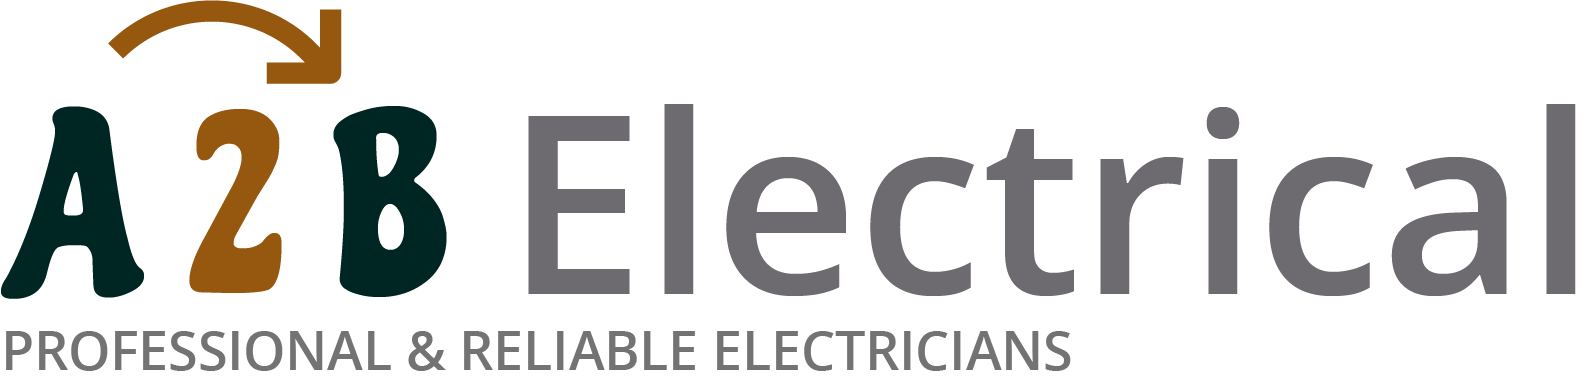 If you have electrical wiring problems in Tidworth, we can provide an electrician to have a look for you. 